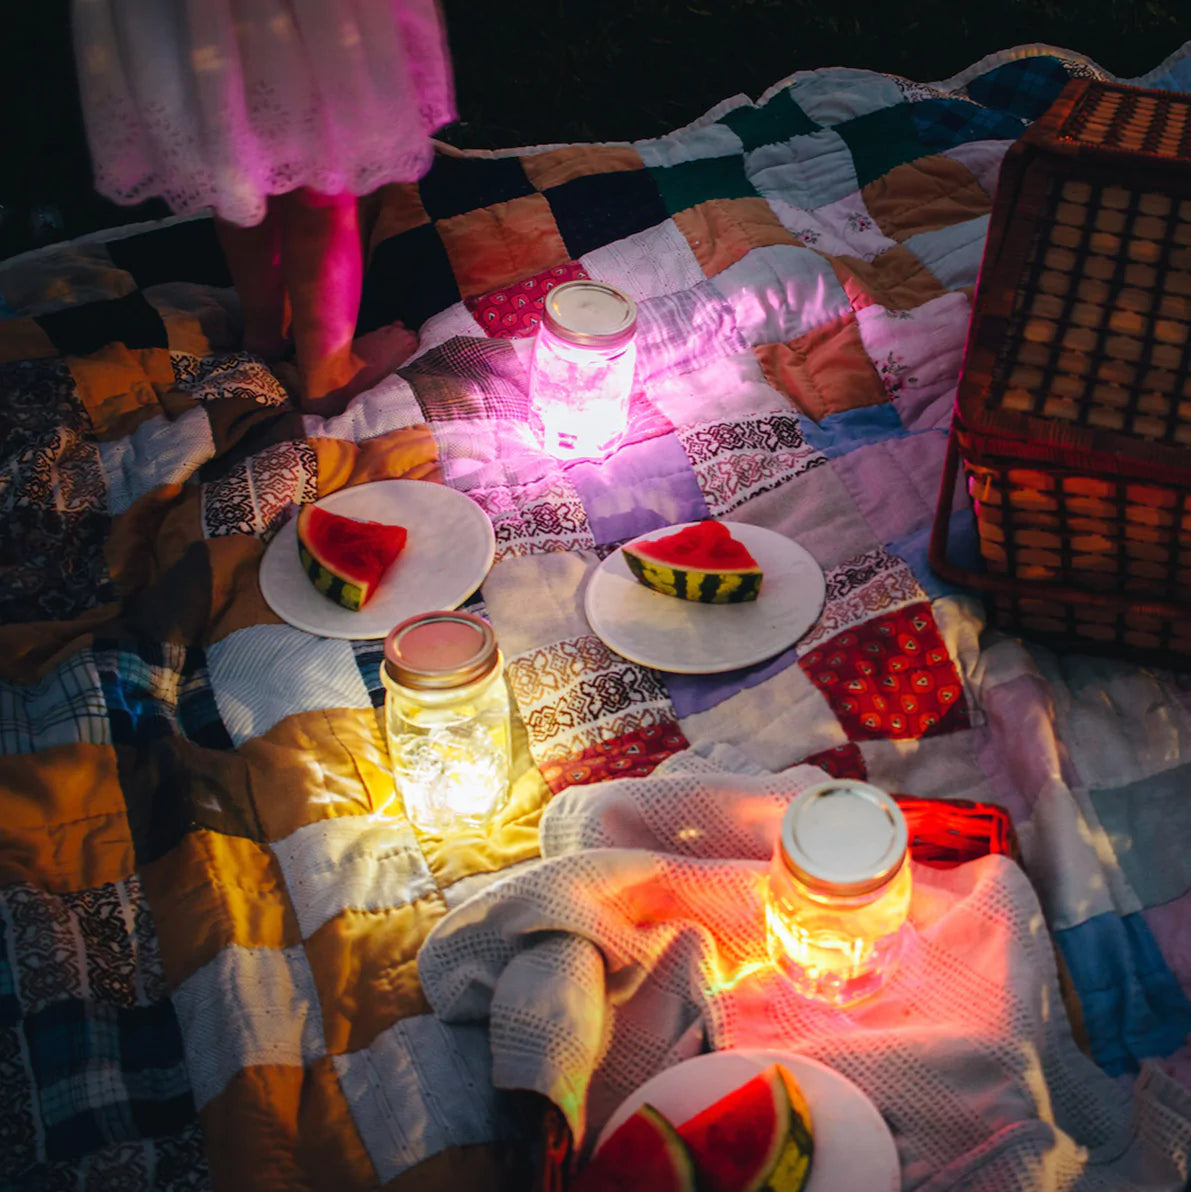 There is a picnic spread on a blanket in a dark yard. There are slices of watermelon on plates next to a picnic basket, and there are three mason jars with lids emitting three different colors from the Glo Liquid-Activated Cubes. There is a child wearing a white dress standing only half in the frame in the top left corner.